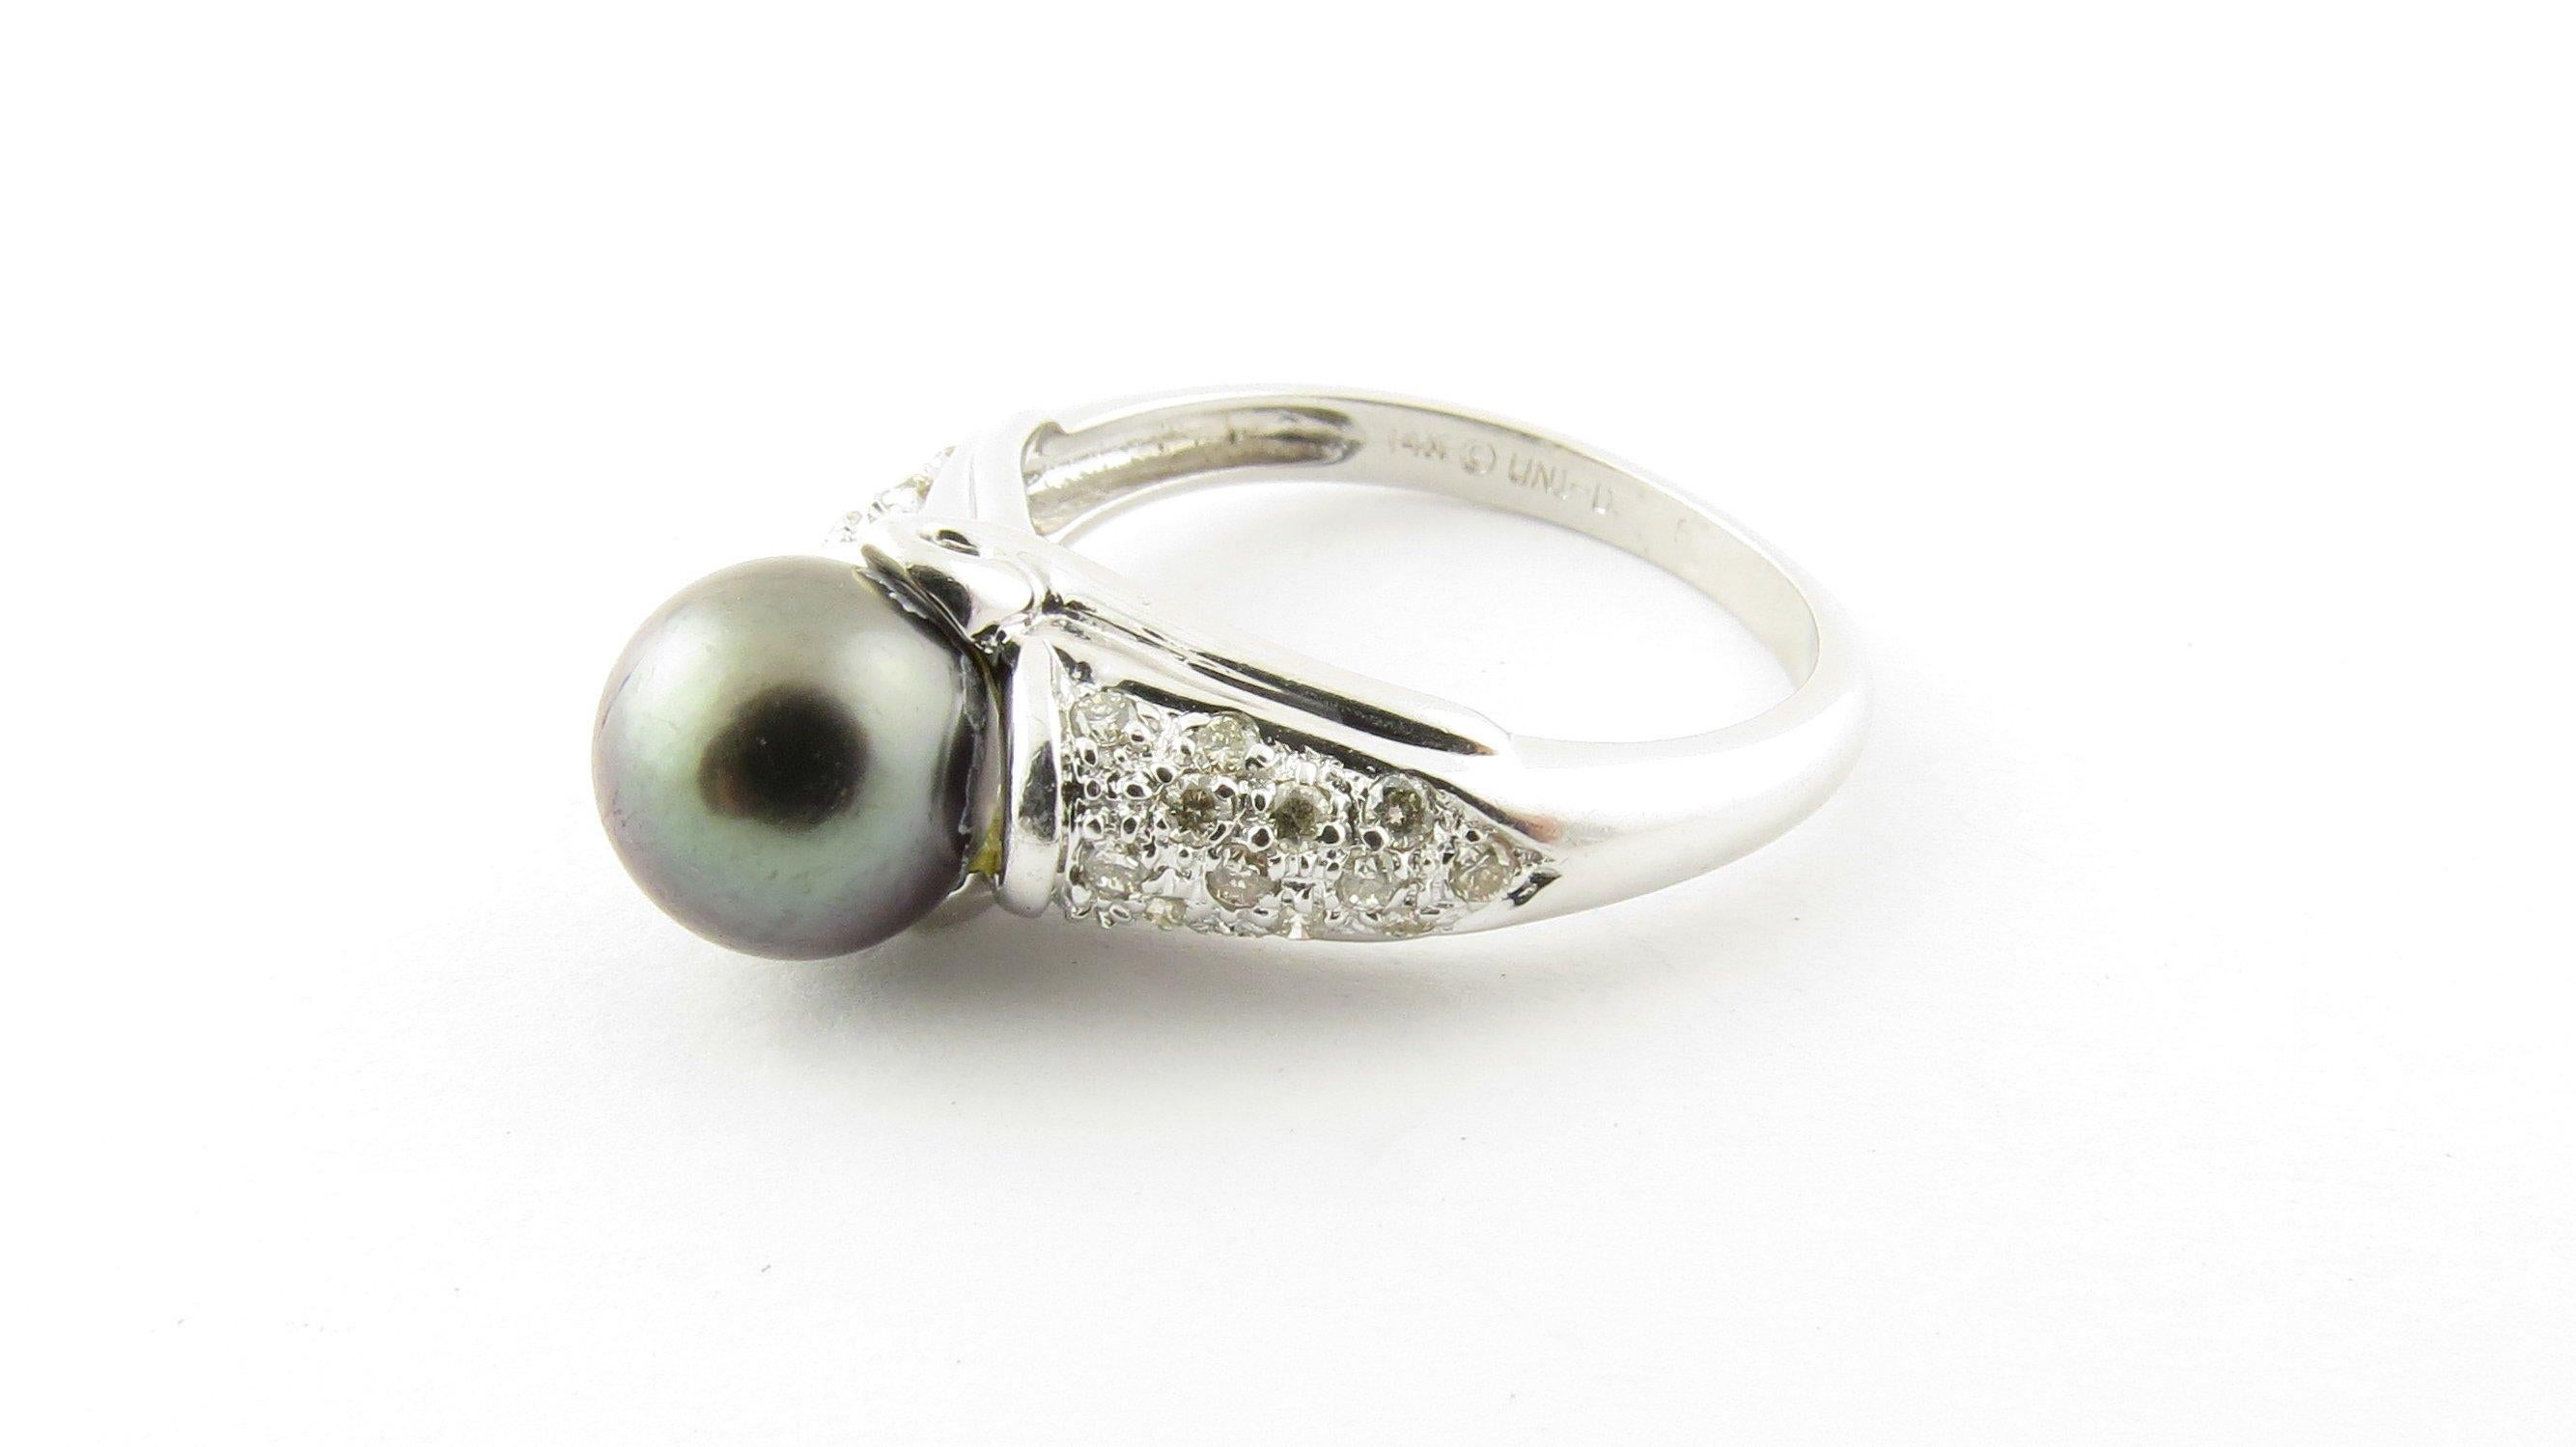 Vintage 14 Karat White Gold Black Pearl and Diamond Ring Size 6.75- This stunning ring features one 9 mm black pearl accented with 28 round brilliant cut diamonds set in beautifully detailed 14K white gold. Shank measures 2 mm. Approximate total